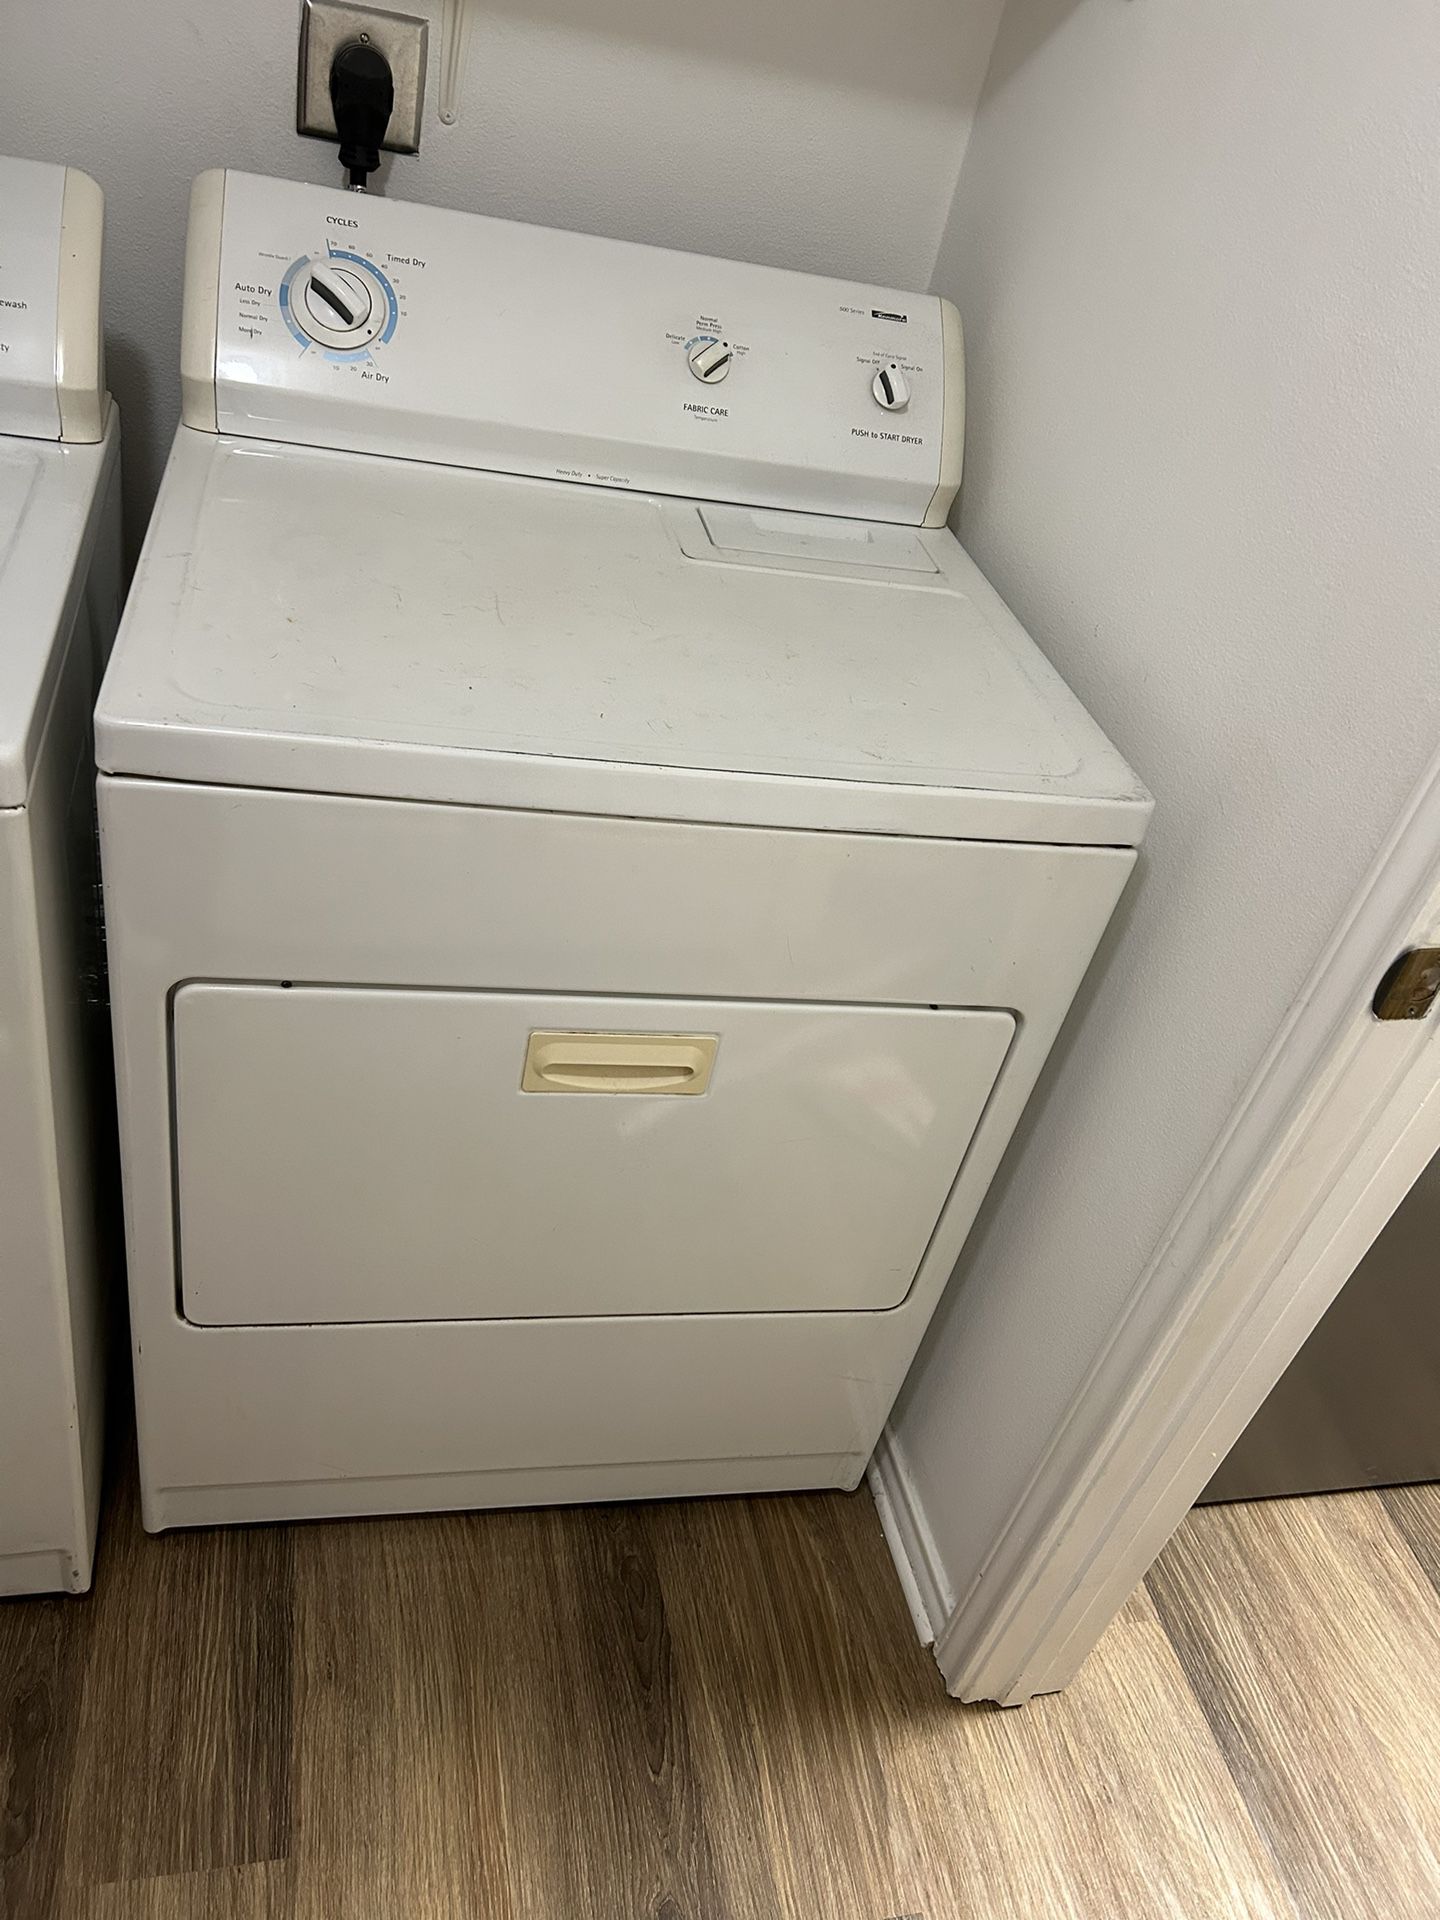 Washer And Dryer - Kenmore 500 Series